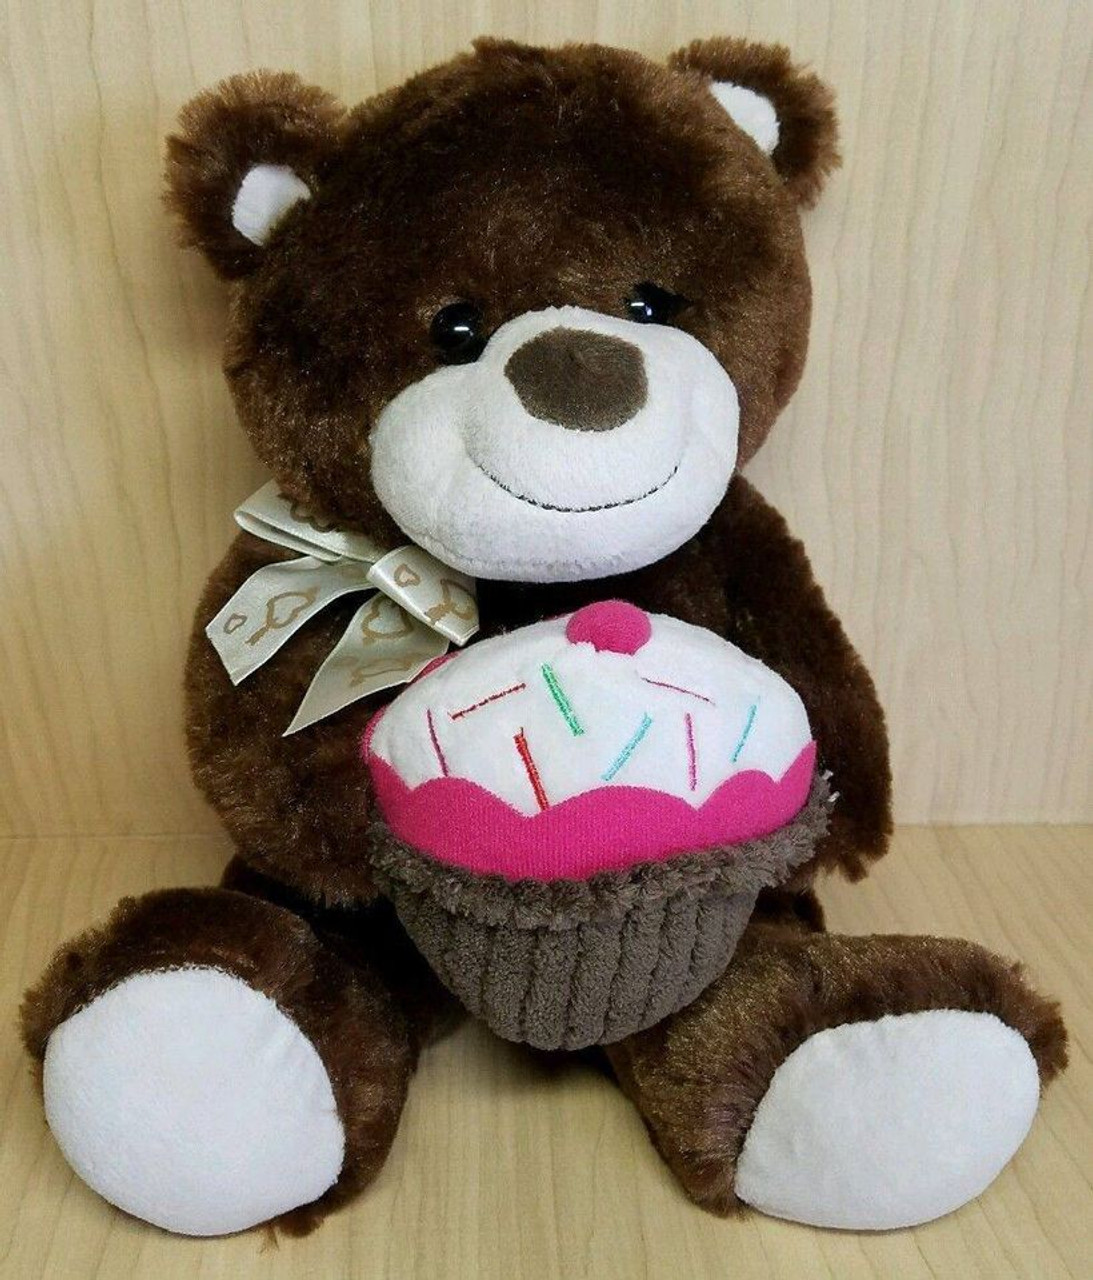 Dark Brown Dan Dee Bear holding a cupcake - sits 9" tall - new without tags